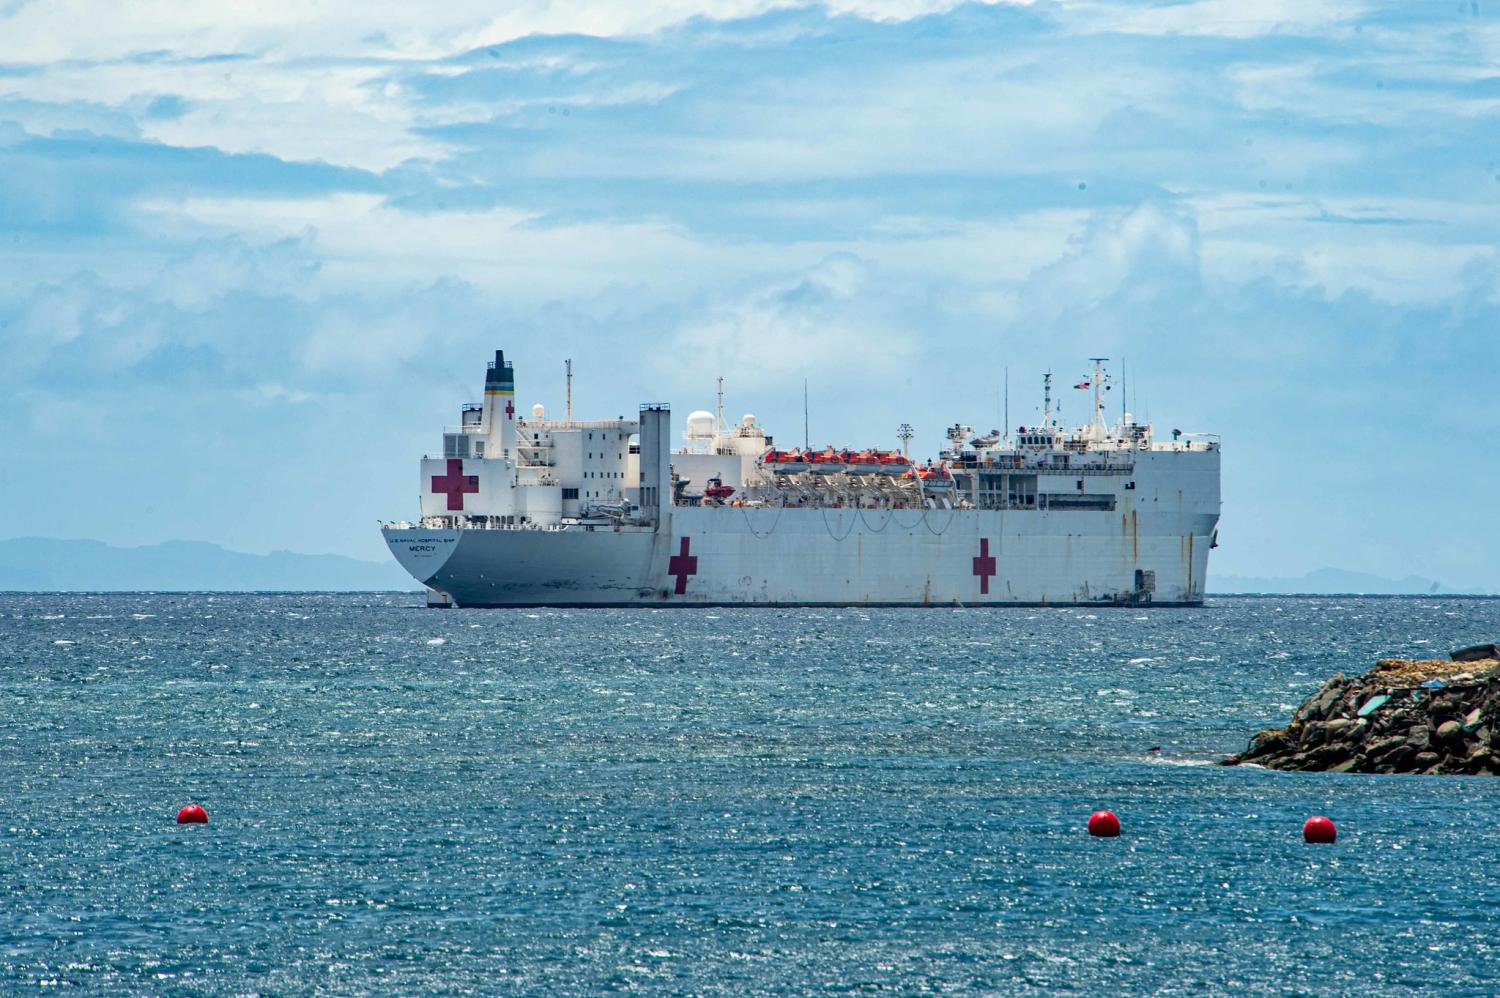 Hospital ship USNS Mercy sits at anchor off the coast of Honiara, Solomon Islands during Pacific Partnership 2022 (Flickr/US Pacific Command)